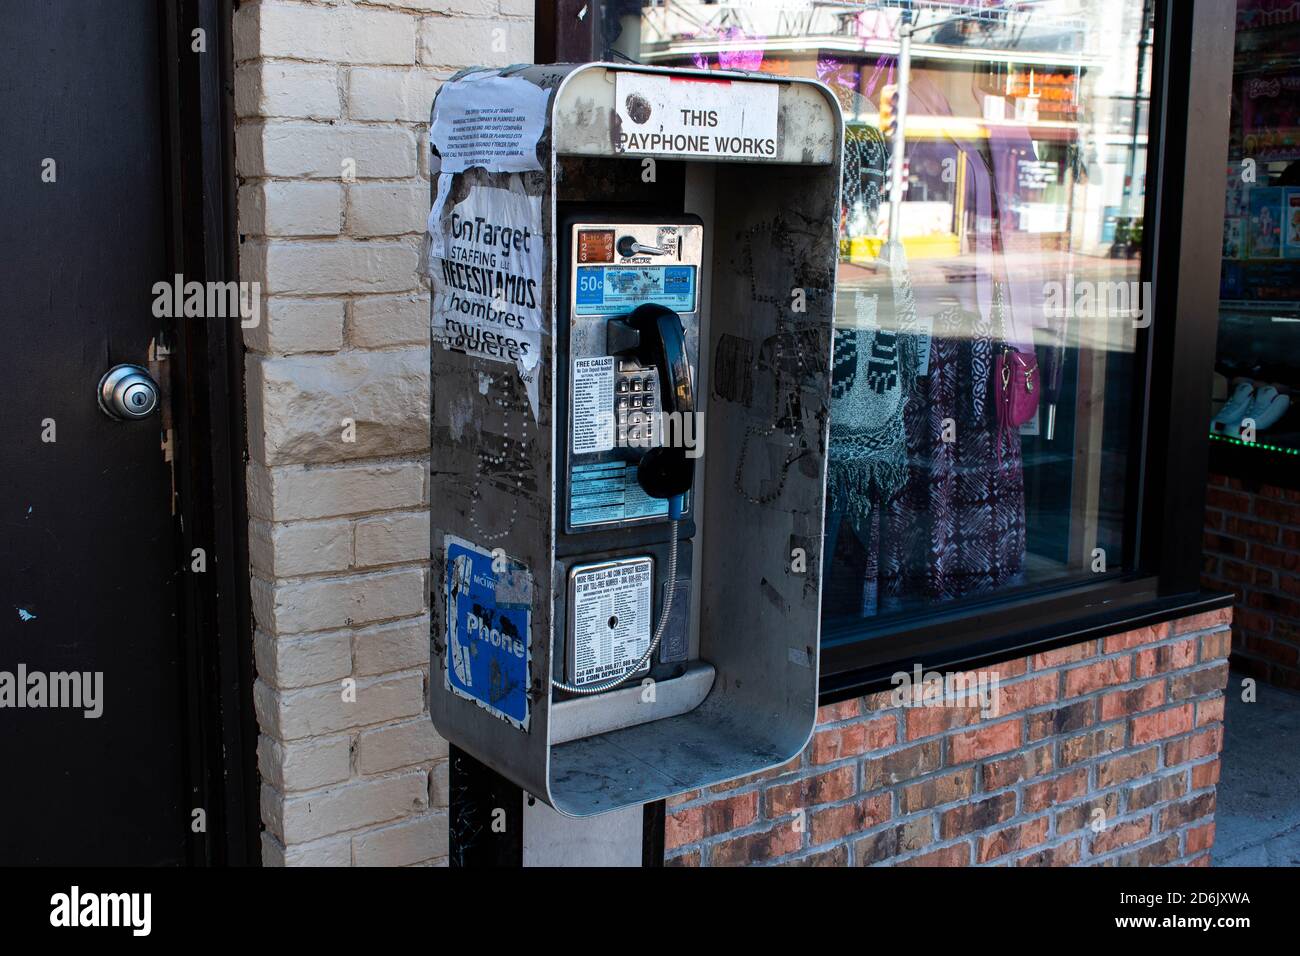 An Old Unused Payphone by A Storefront in PLainfield NJ Stock Photo